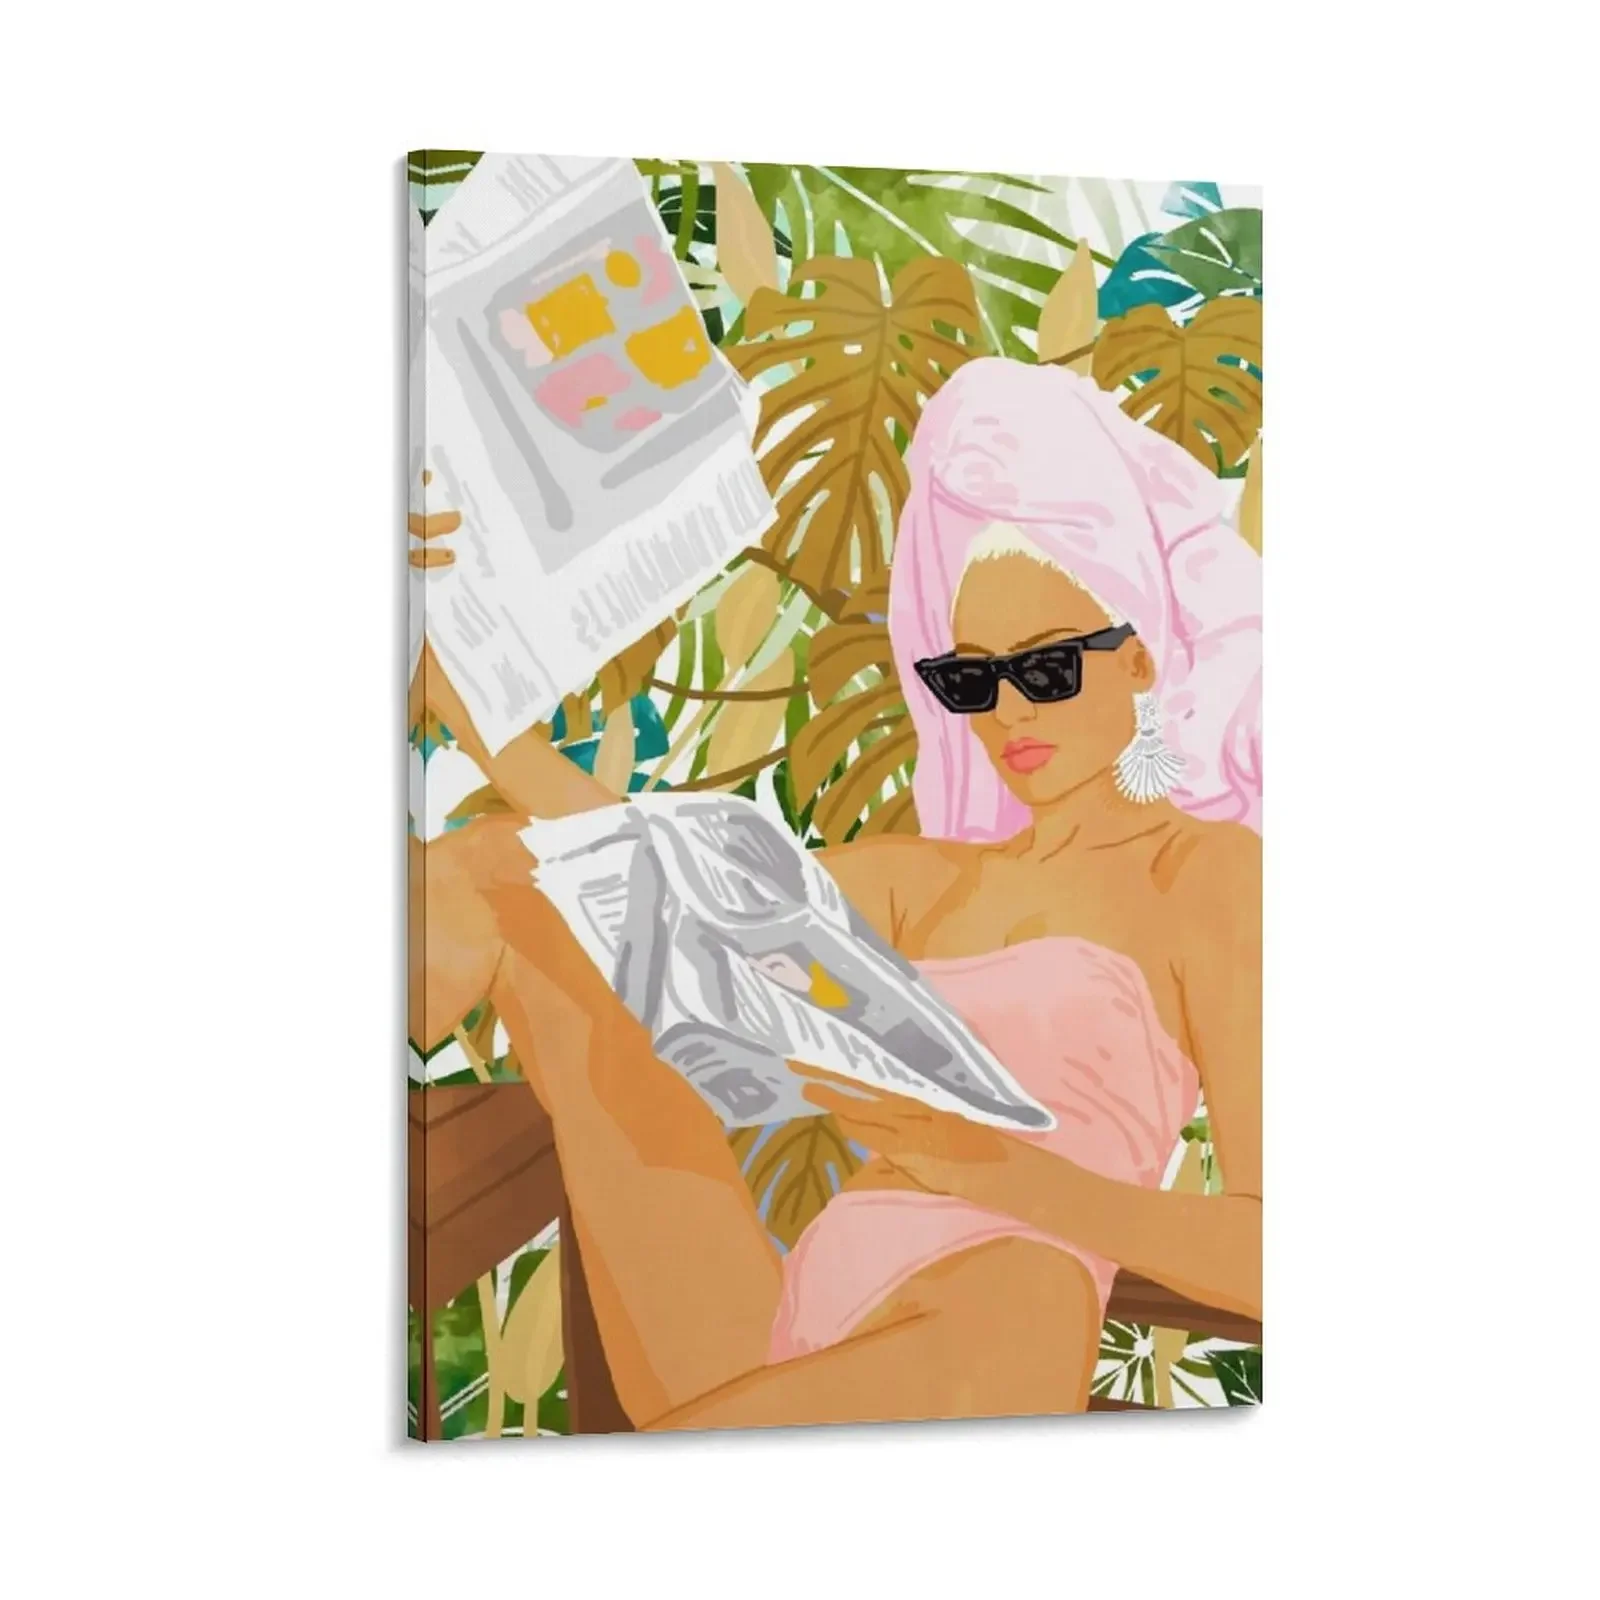 

Vacay News, Tropical Modern Bohemian Illustration, Travel Woman Fashion Newspaper Painting Canvas Painting stickers & posters